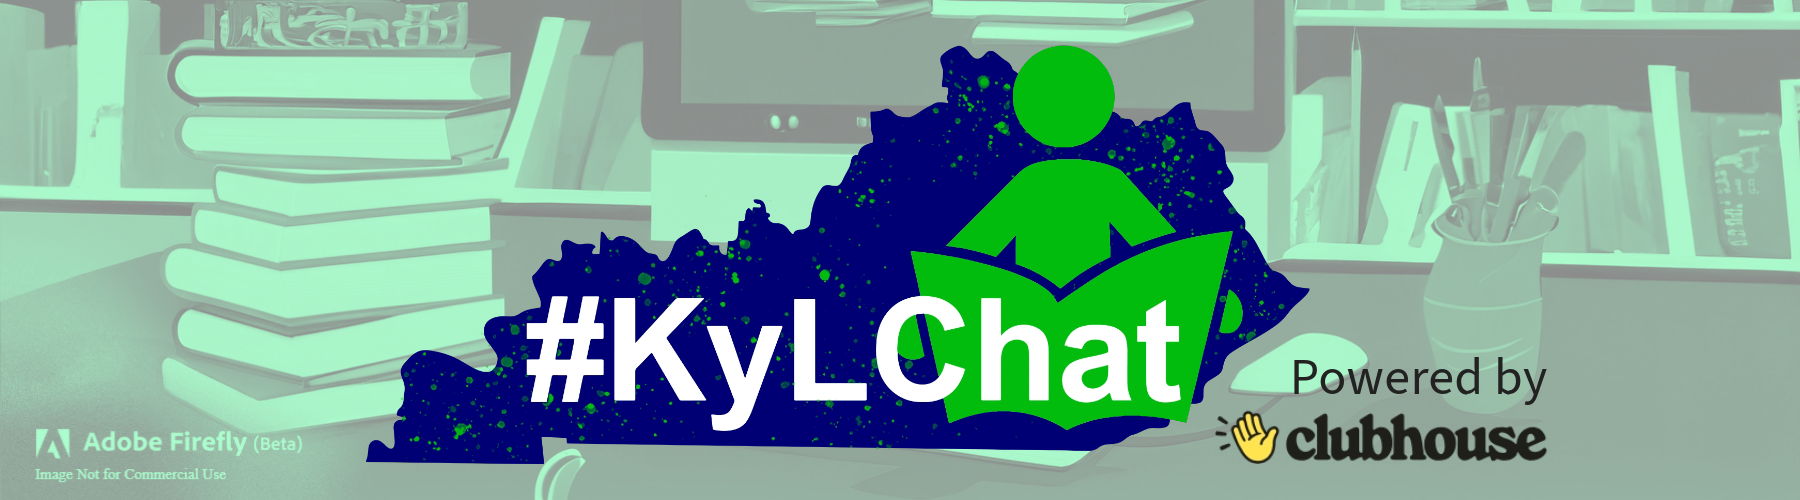 KyLChat logo on top of a school library background illustration of books and a computer, also includes "Powered by Clubhouse app logo"